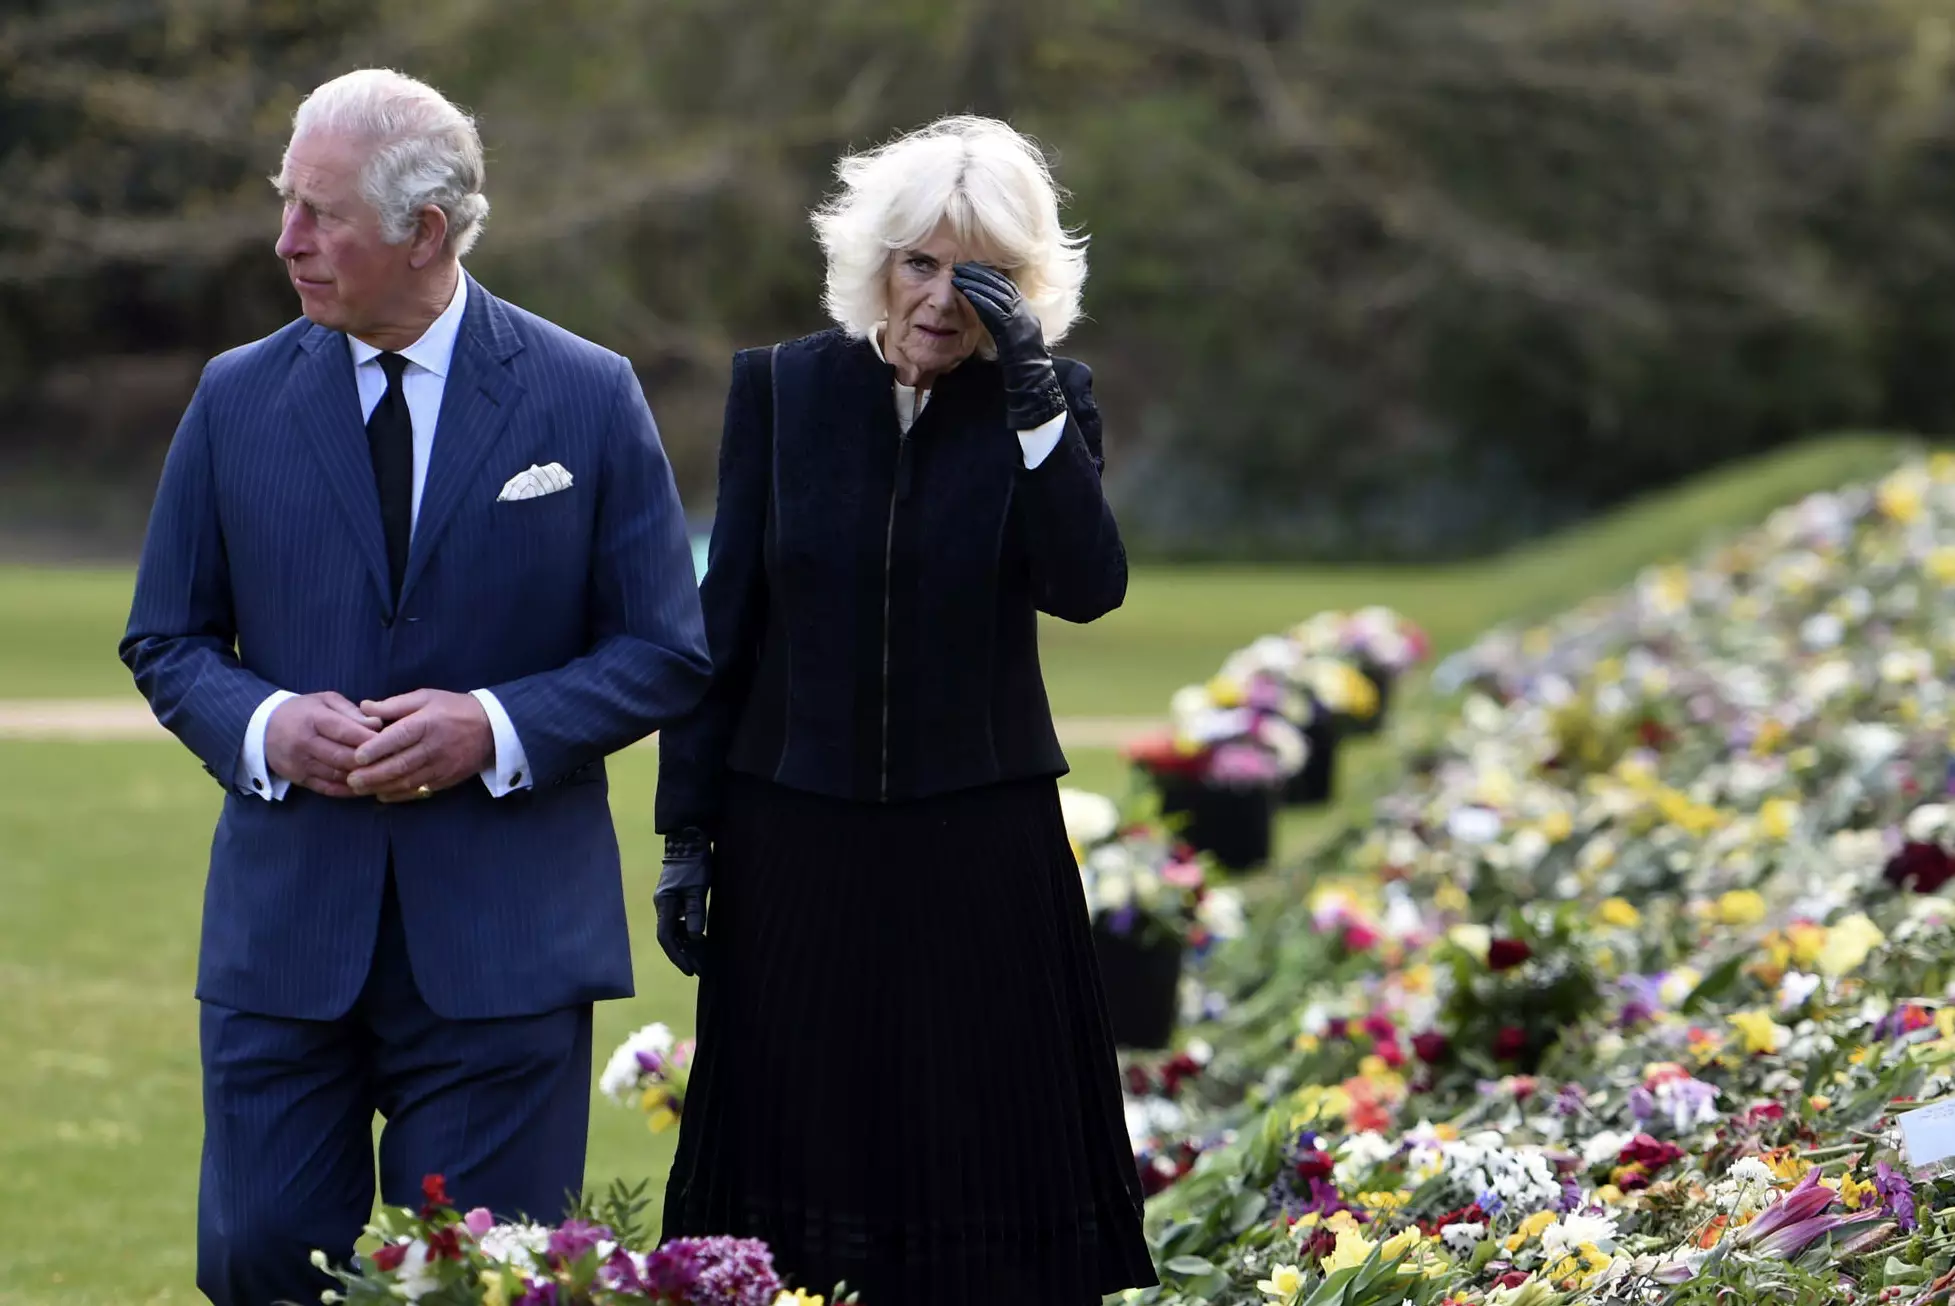 Prince Charles and Camilla, Duke of Cornwall, visit the tributes to the late Prince Philip.